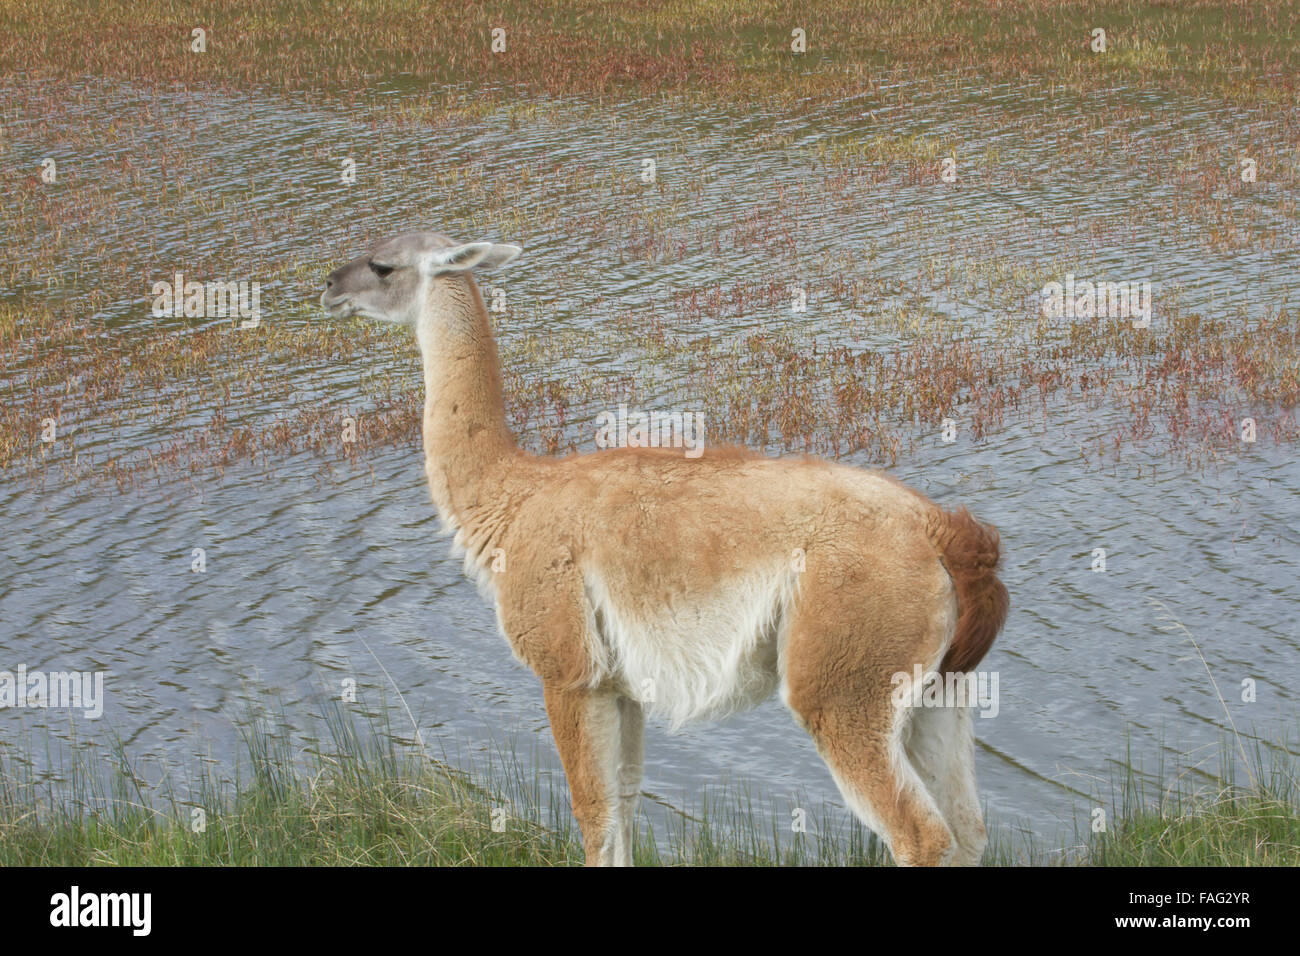 Profile of guanaco standing by waters edge in Chilean steppe with bent ears and tucked tail. Stock Photo